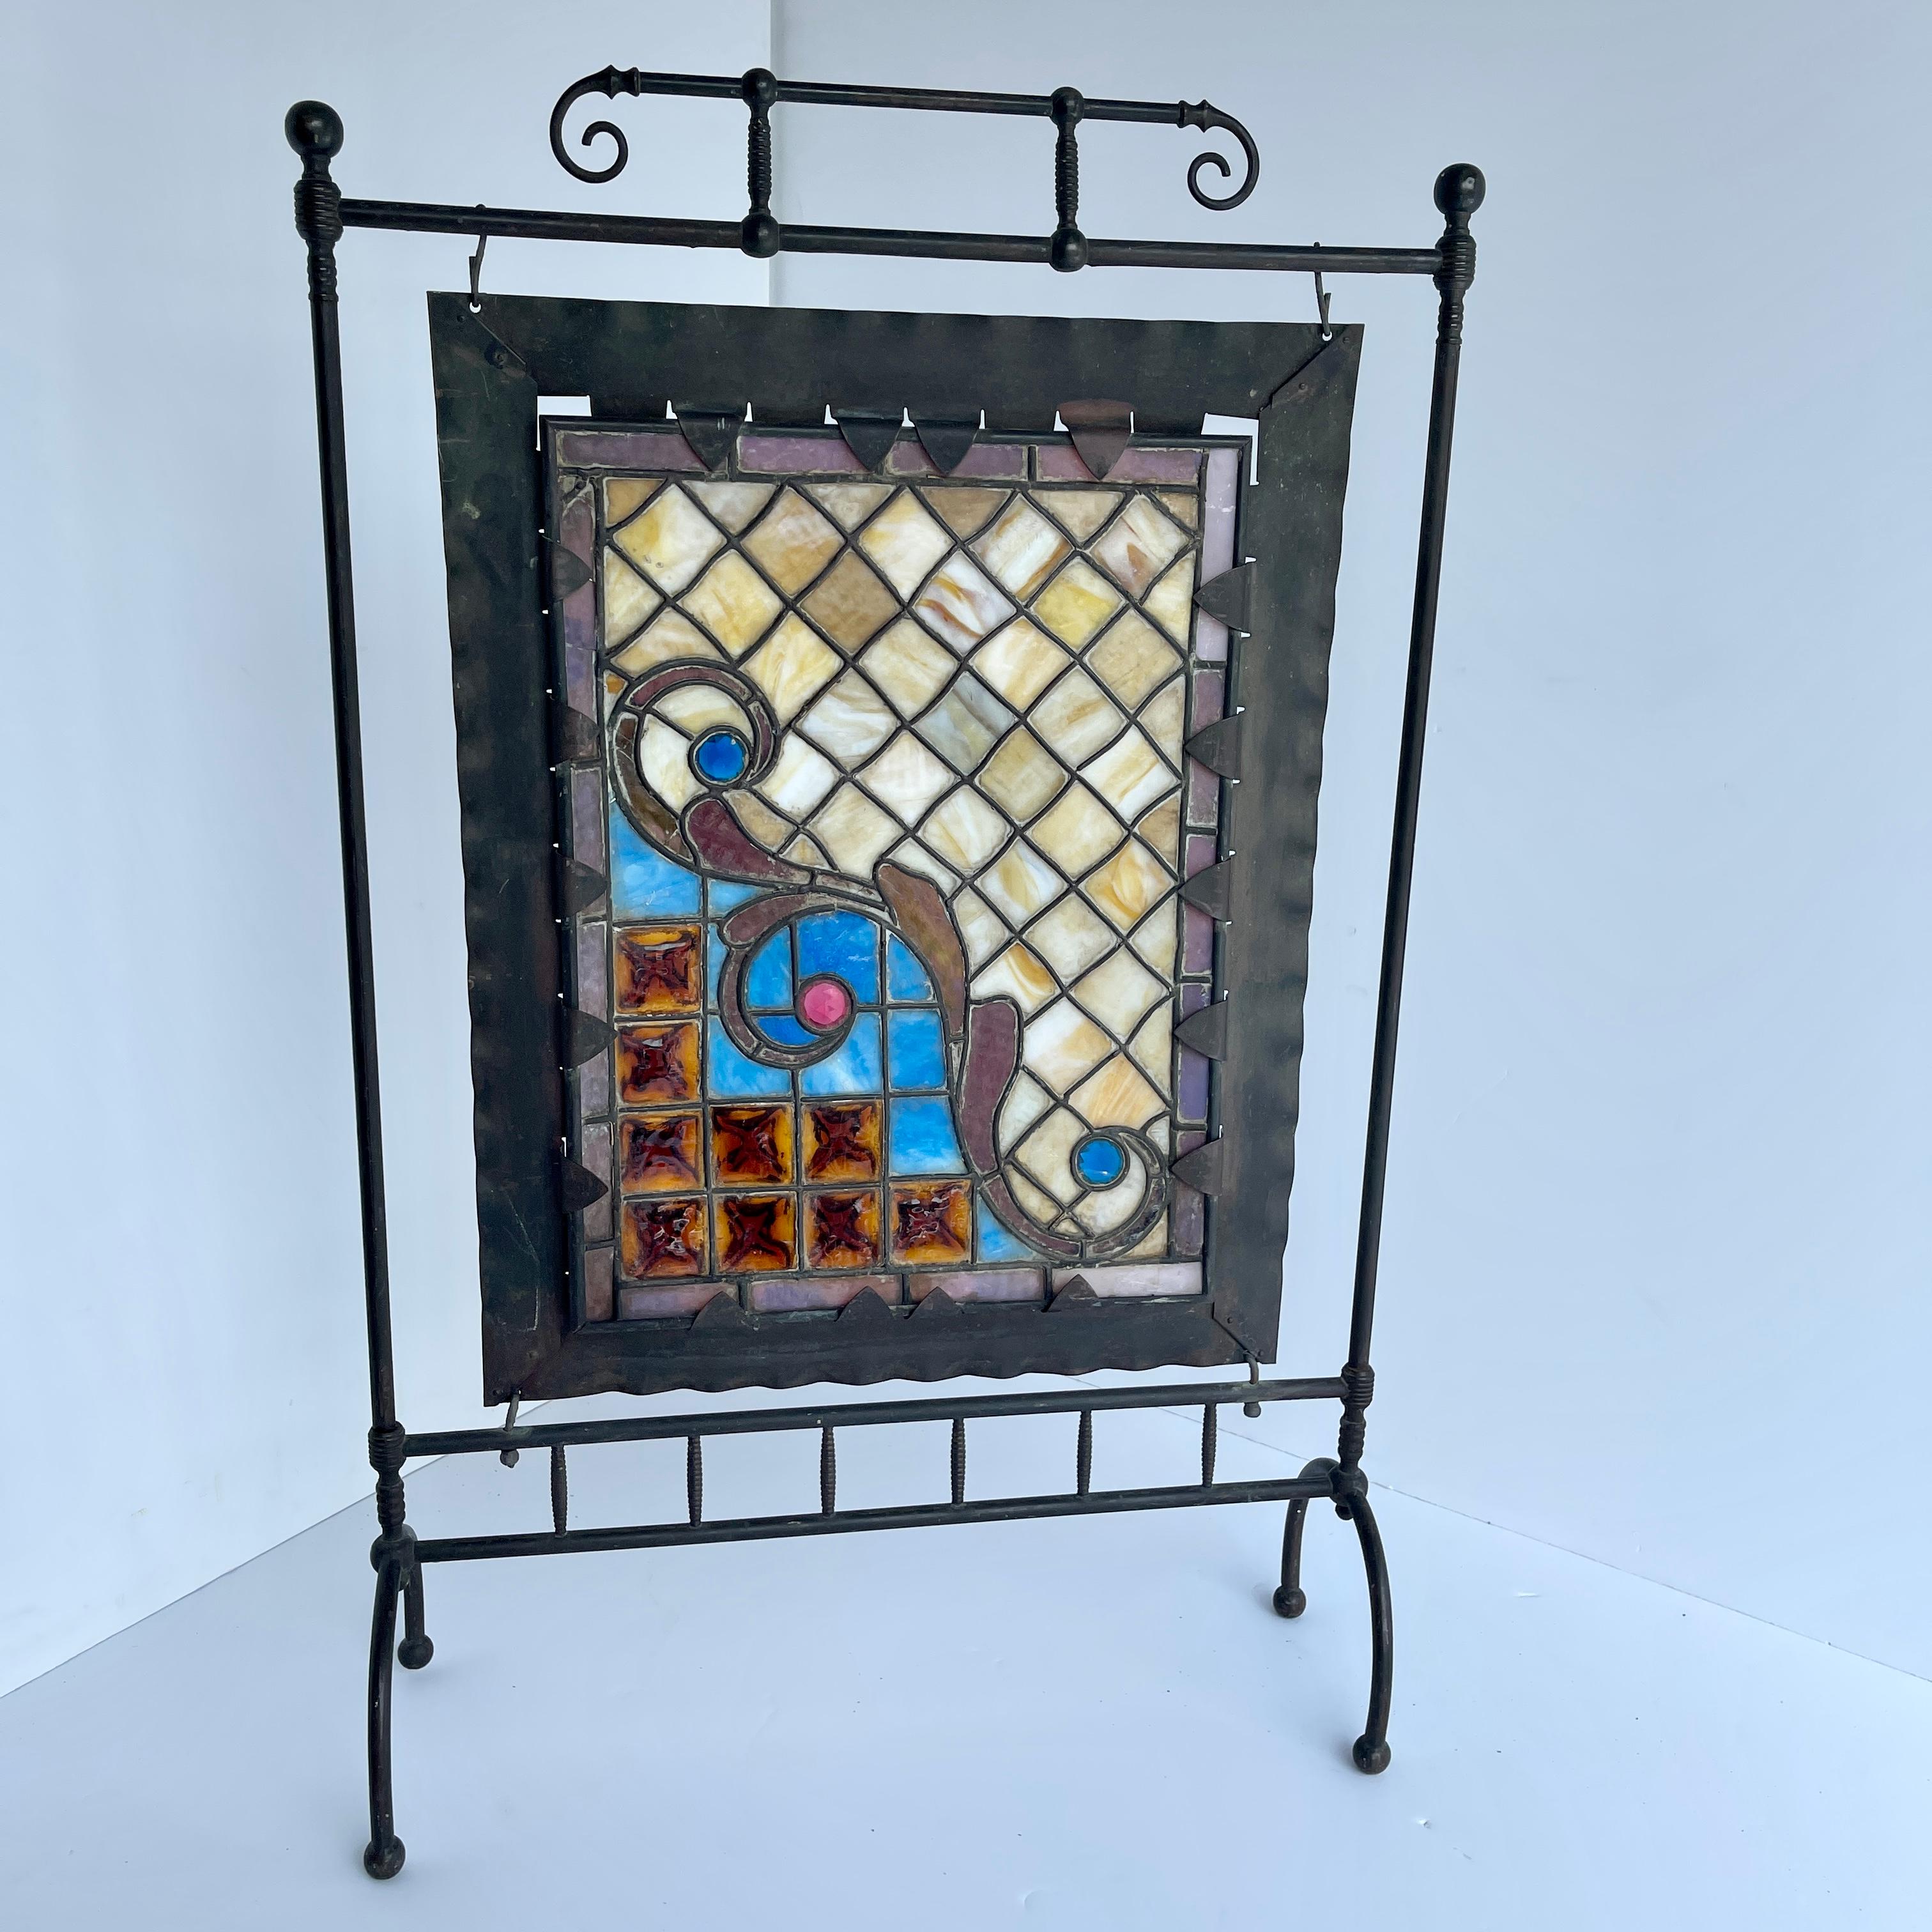 Iron fireplace screen with stained glass, Arts & Crafts era.
The unique design of this fireplace screen is enhanced by the light shining through the colorful stained glass. The center is framed in black metal with decorative curved iron braces. The